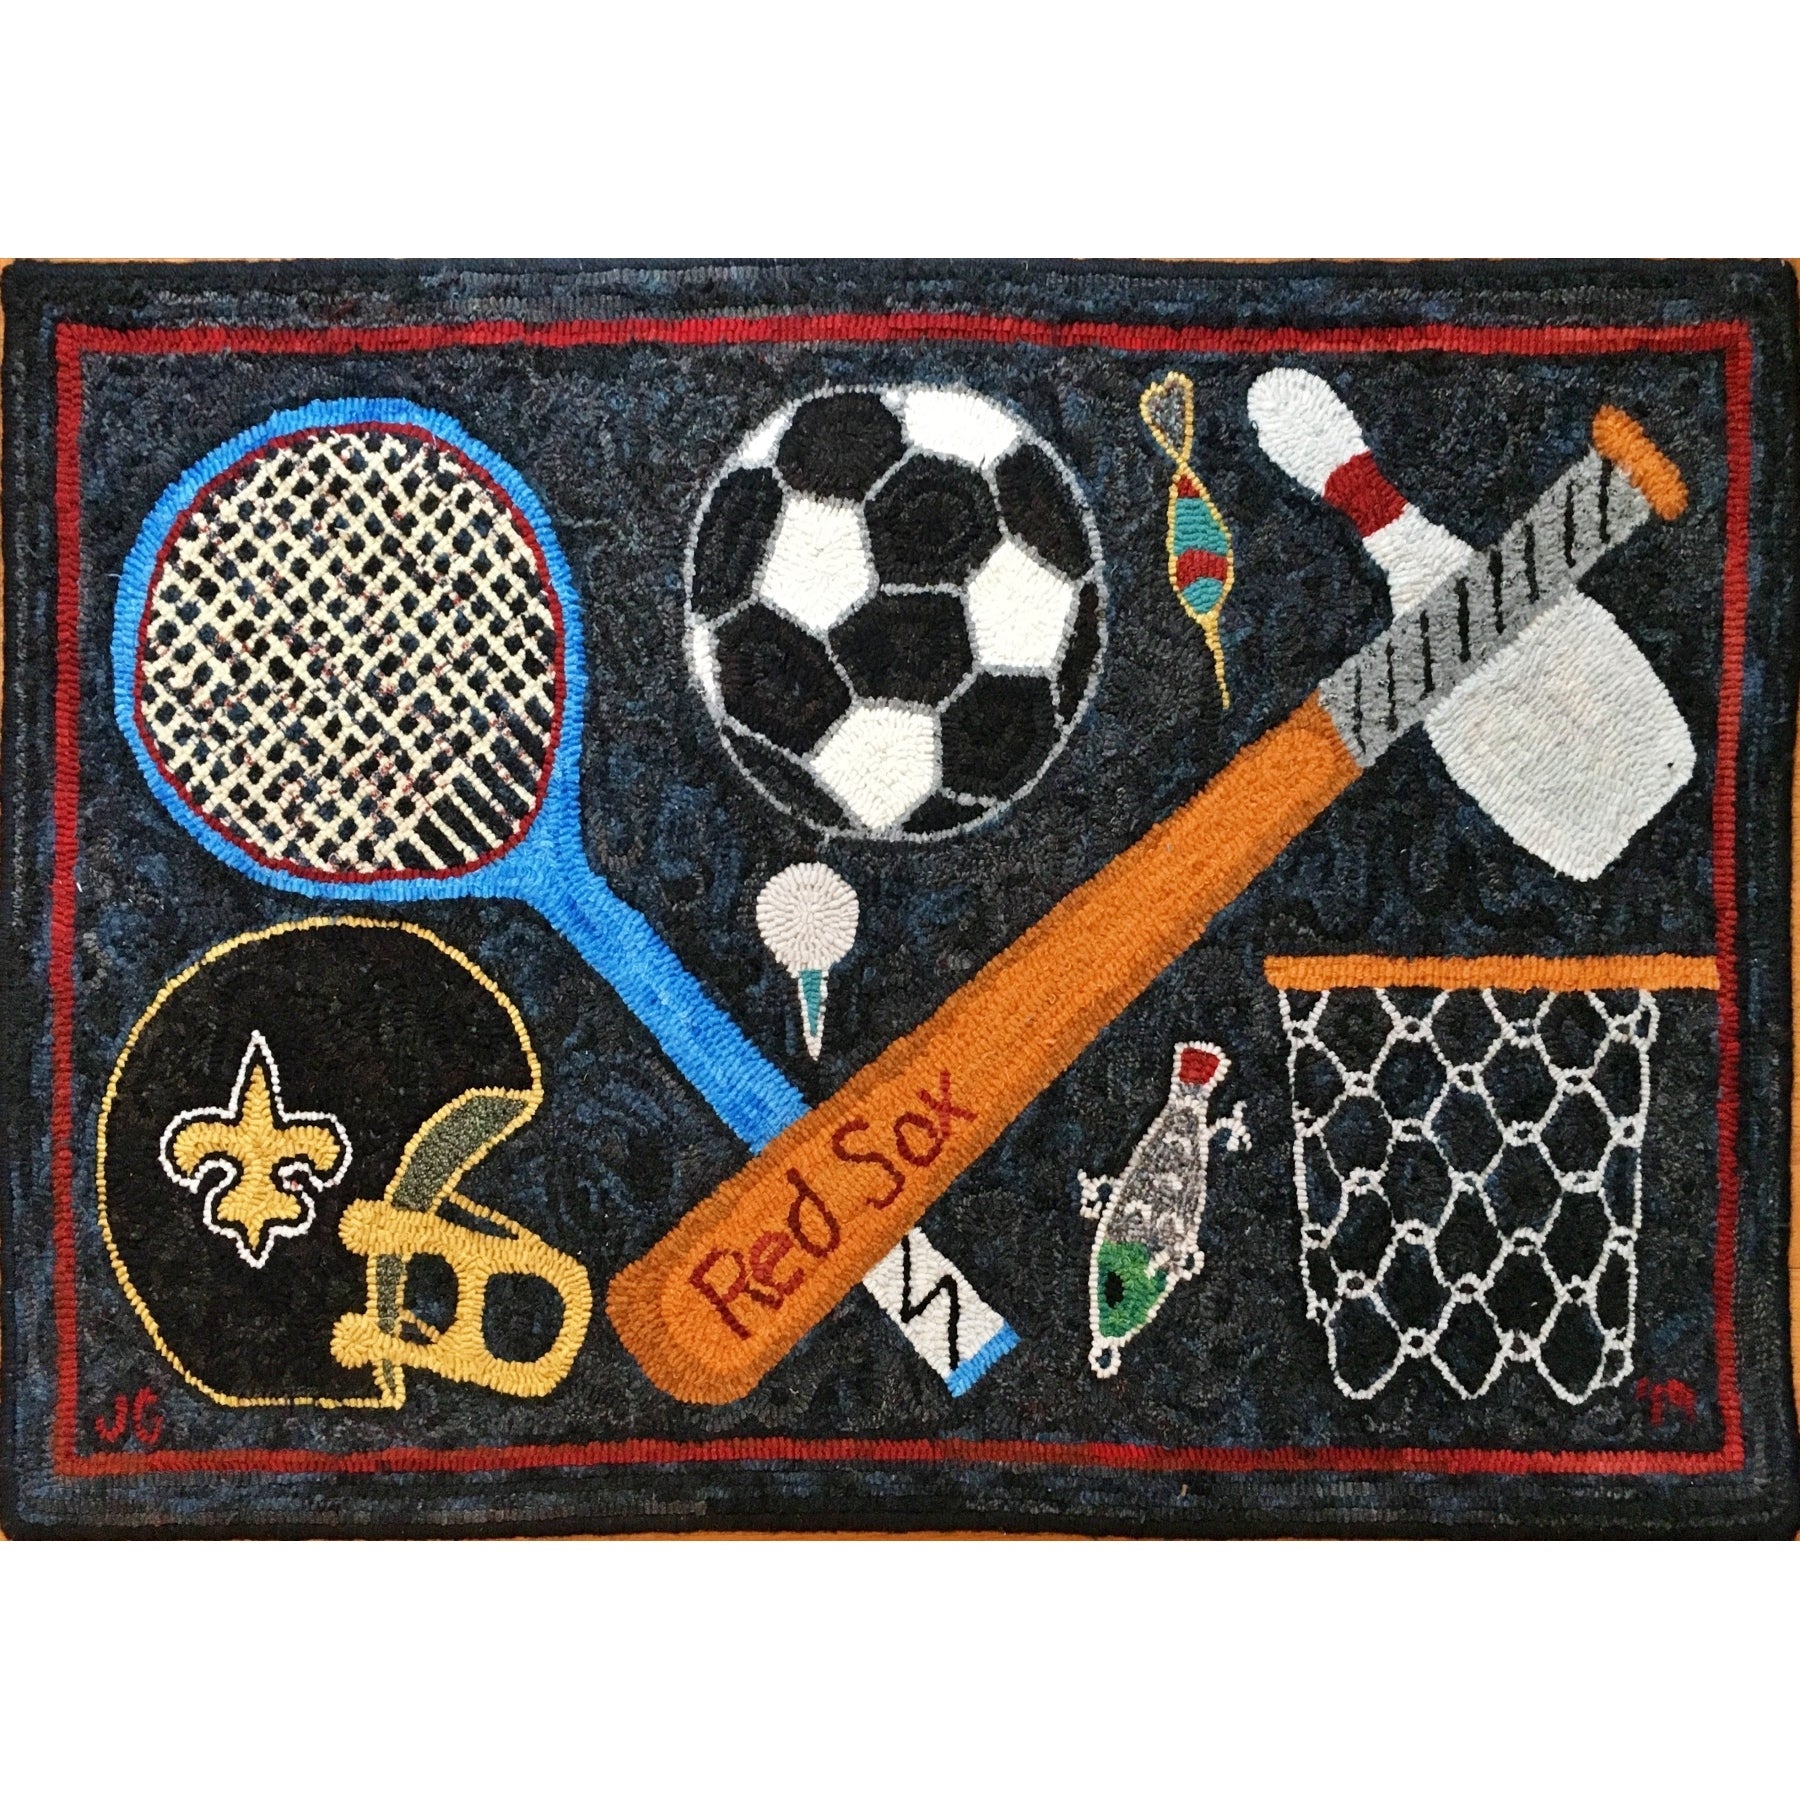 Good Sports, rug hooked by Jean Geswein